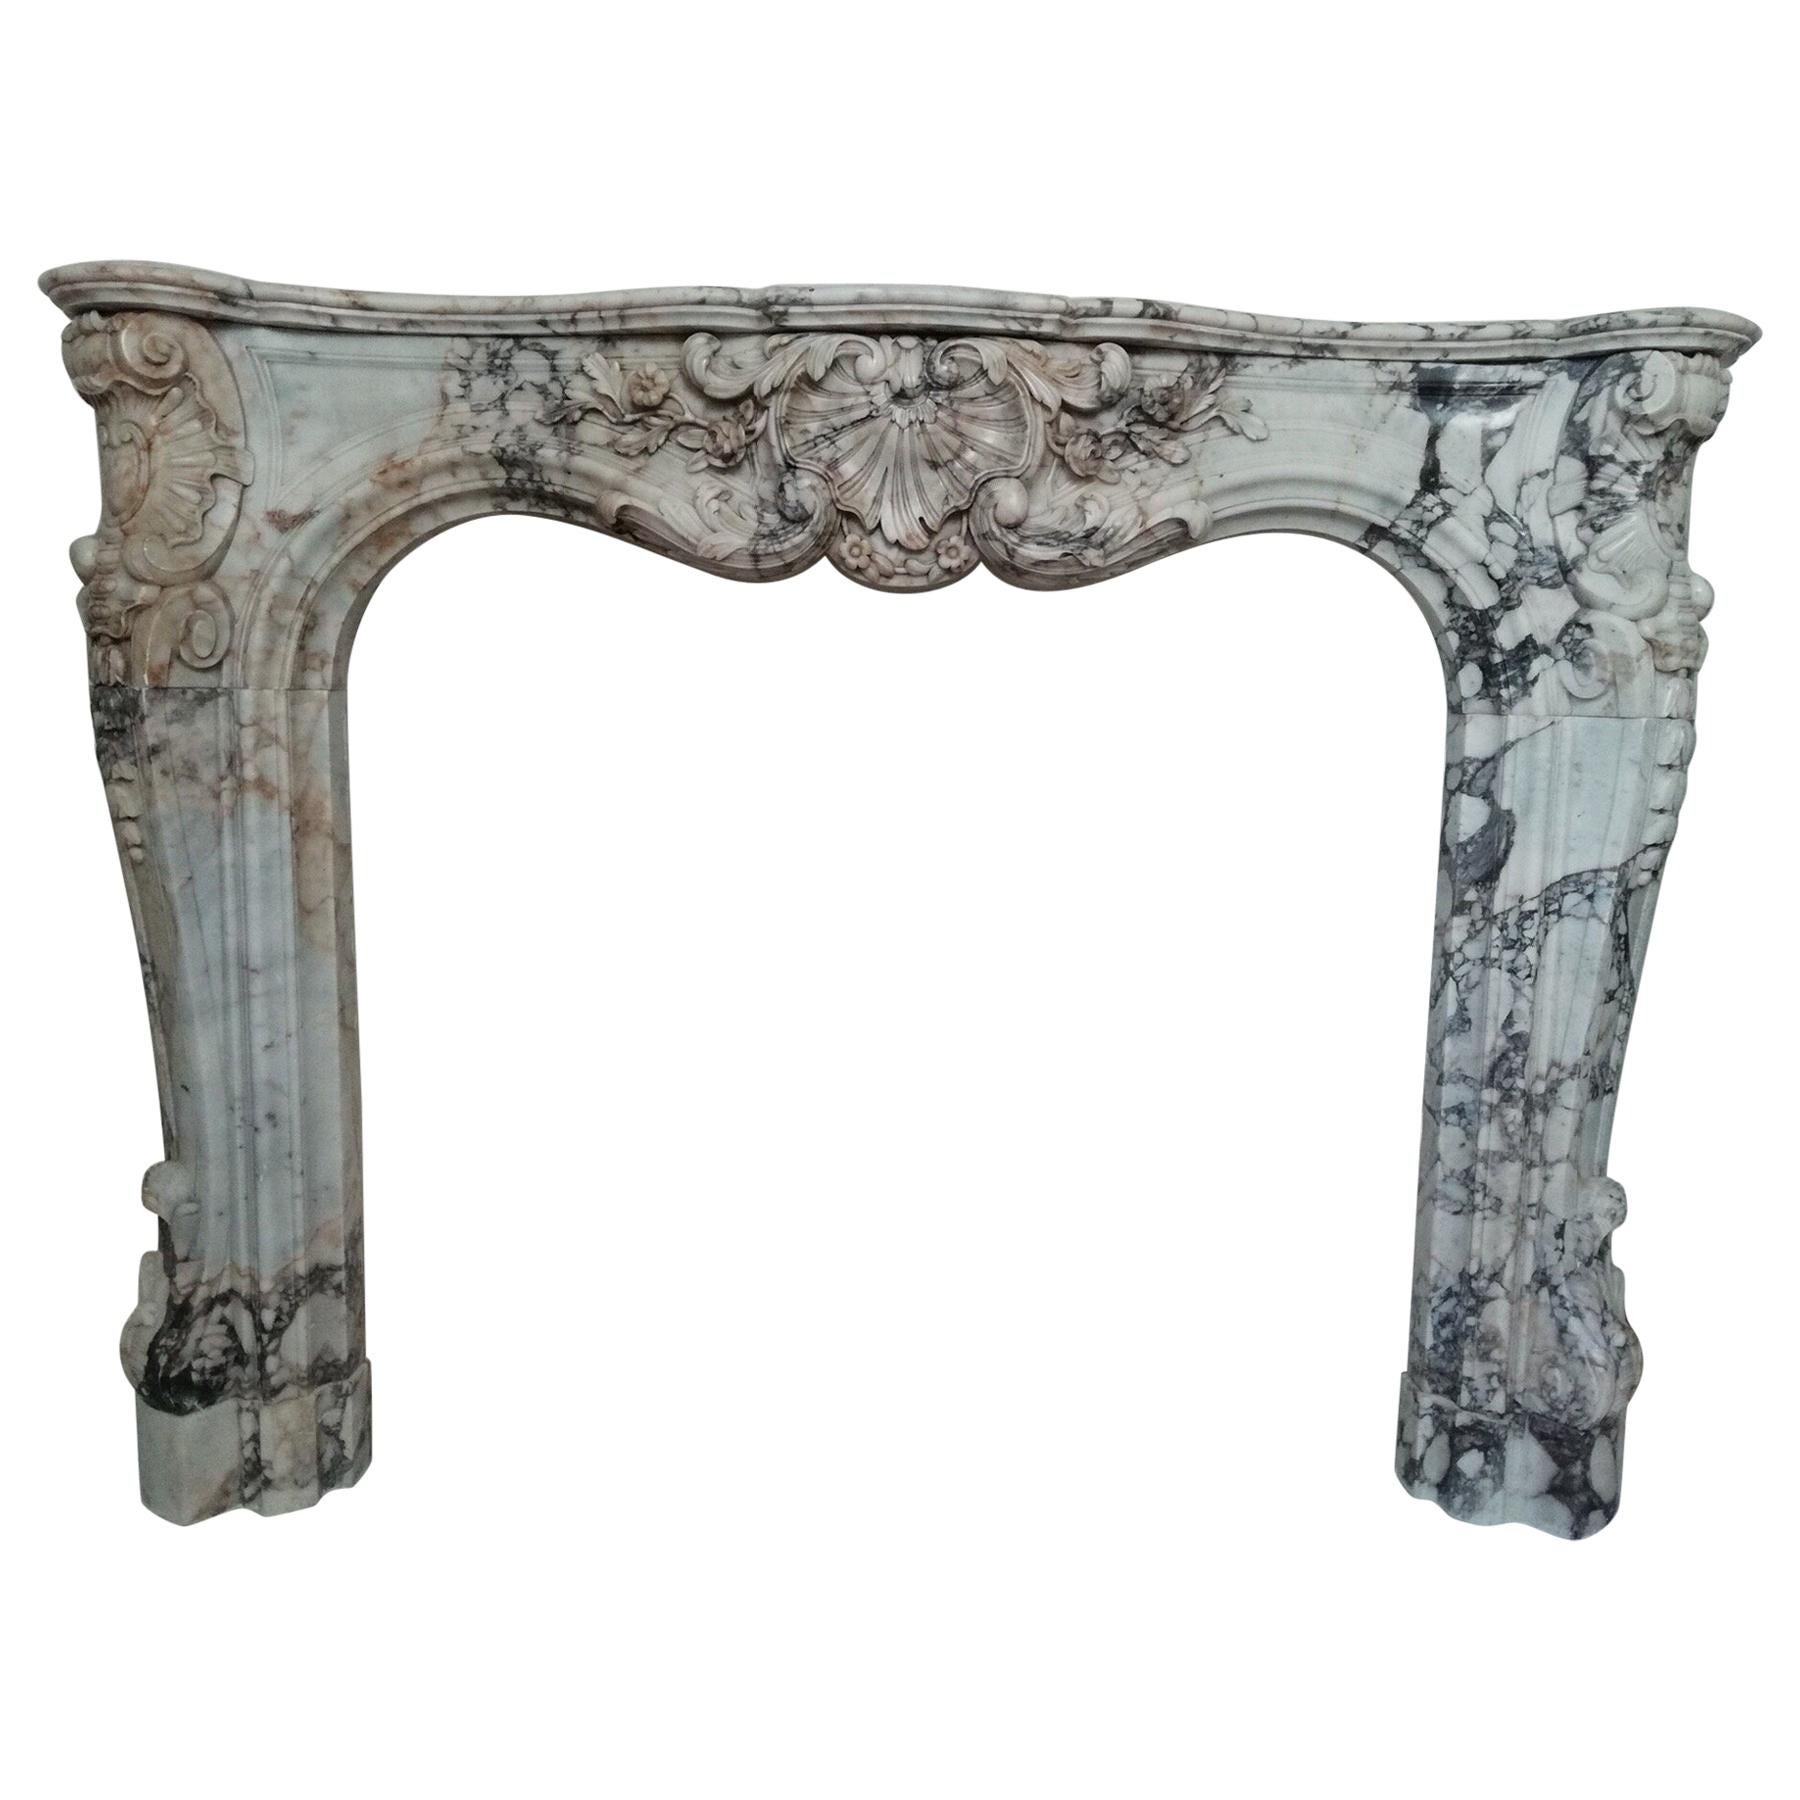 Important Regence Style Callacata Gold Marble Fireplace Mantel, 19th Century For Sale